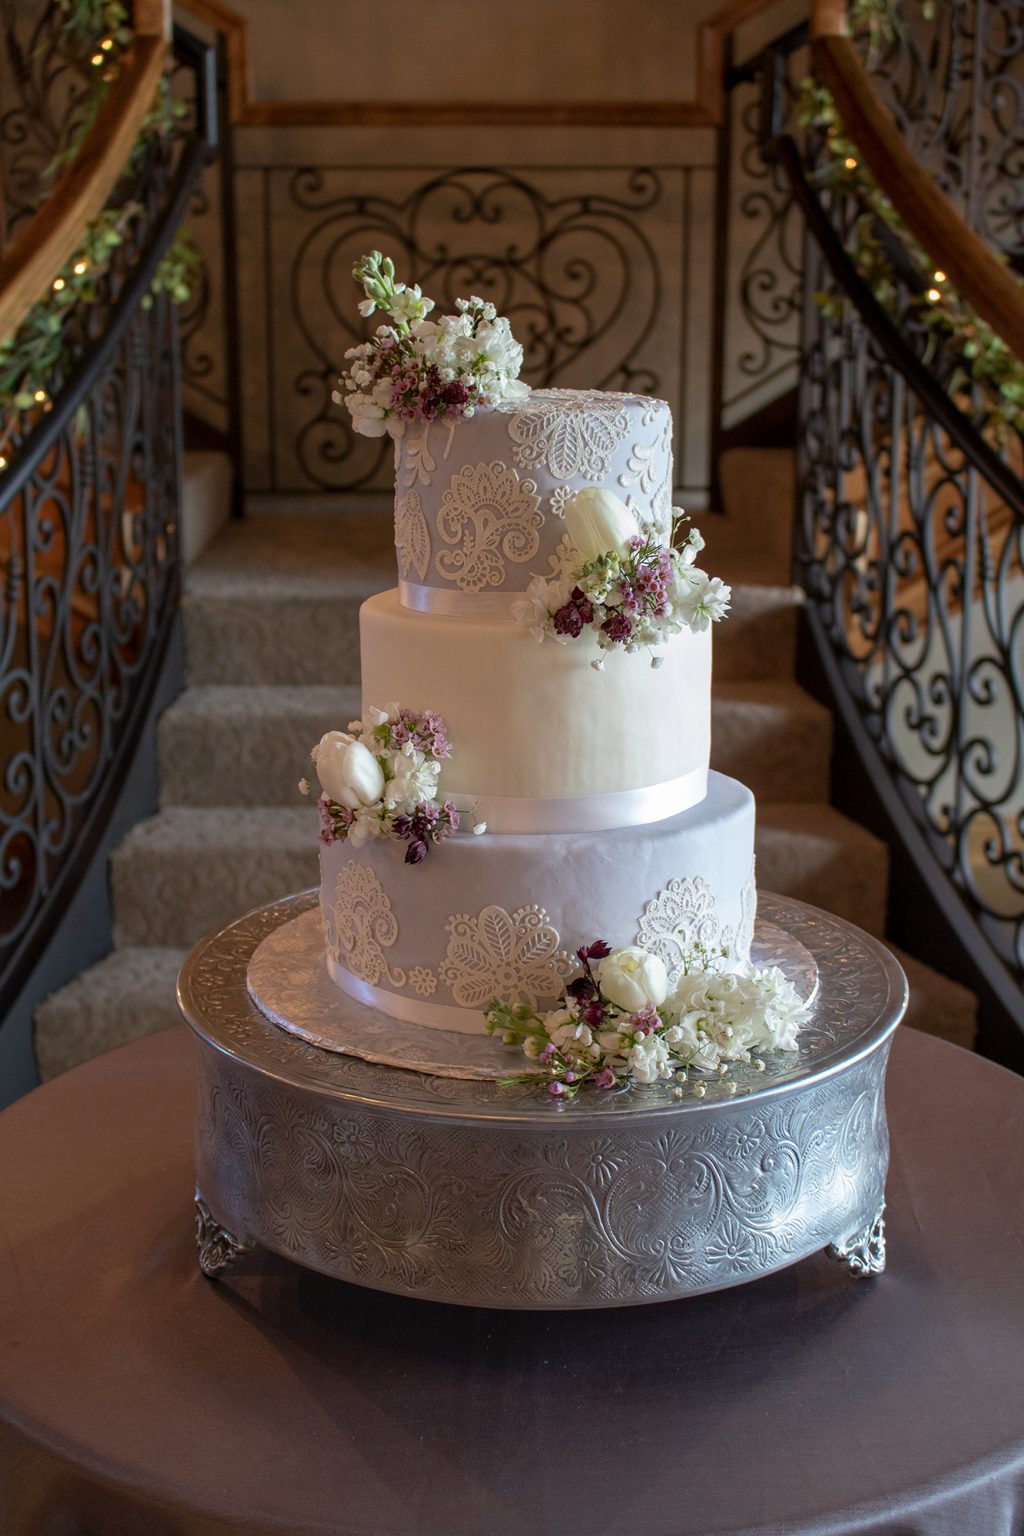 3 Tier Lavender Spring Wedding Cake with Edible Lace